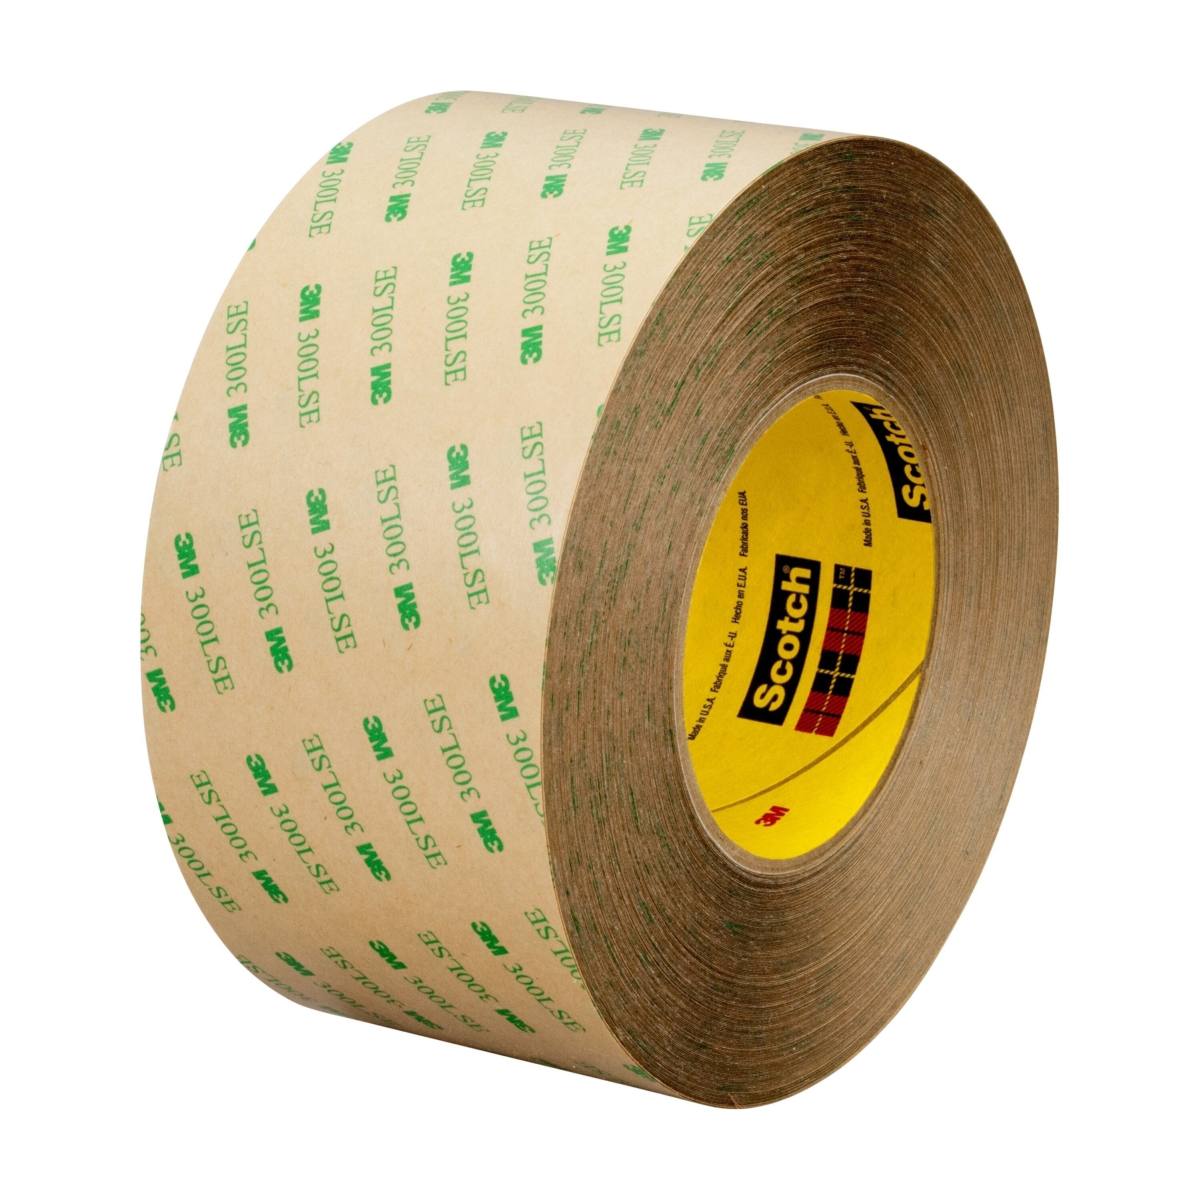 3M Dubbelzijdig plakband met polyester drager 93015LE, transparant, 19 mm x 55 m, 0,15 mm